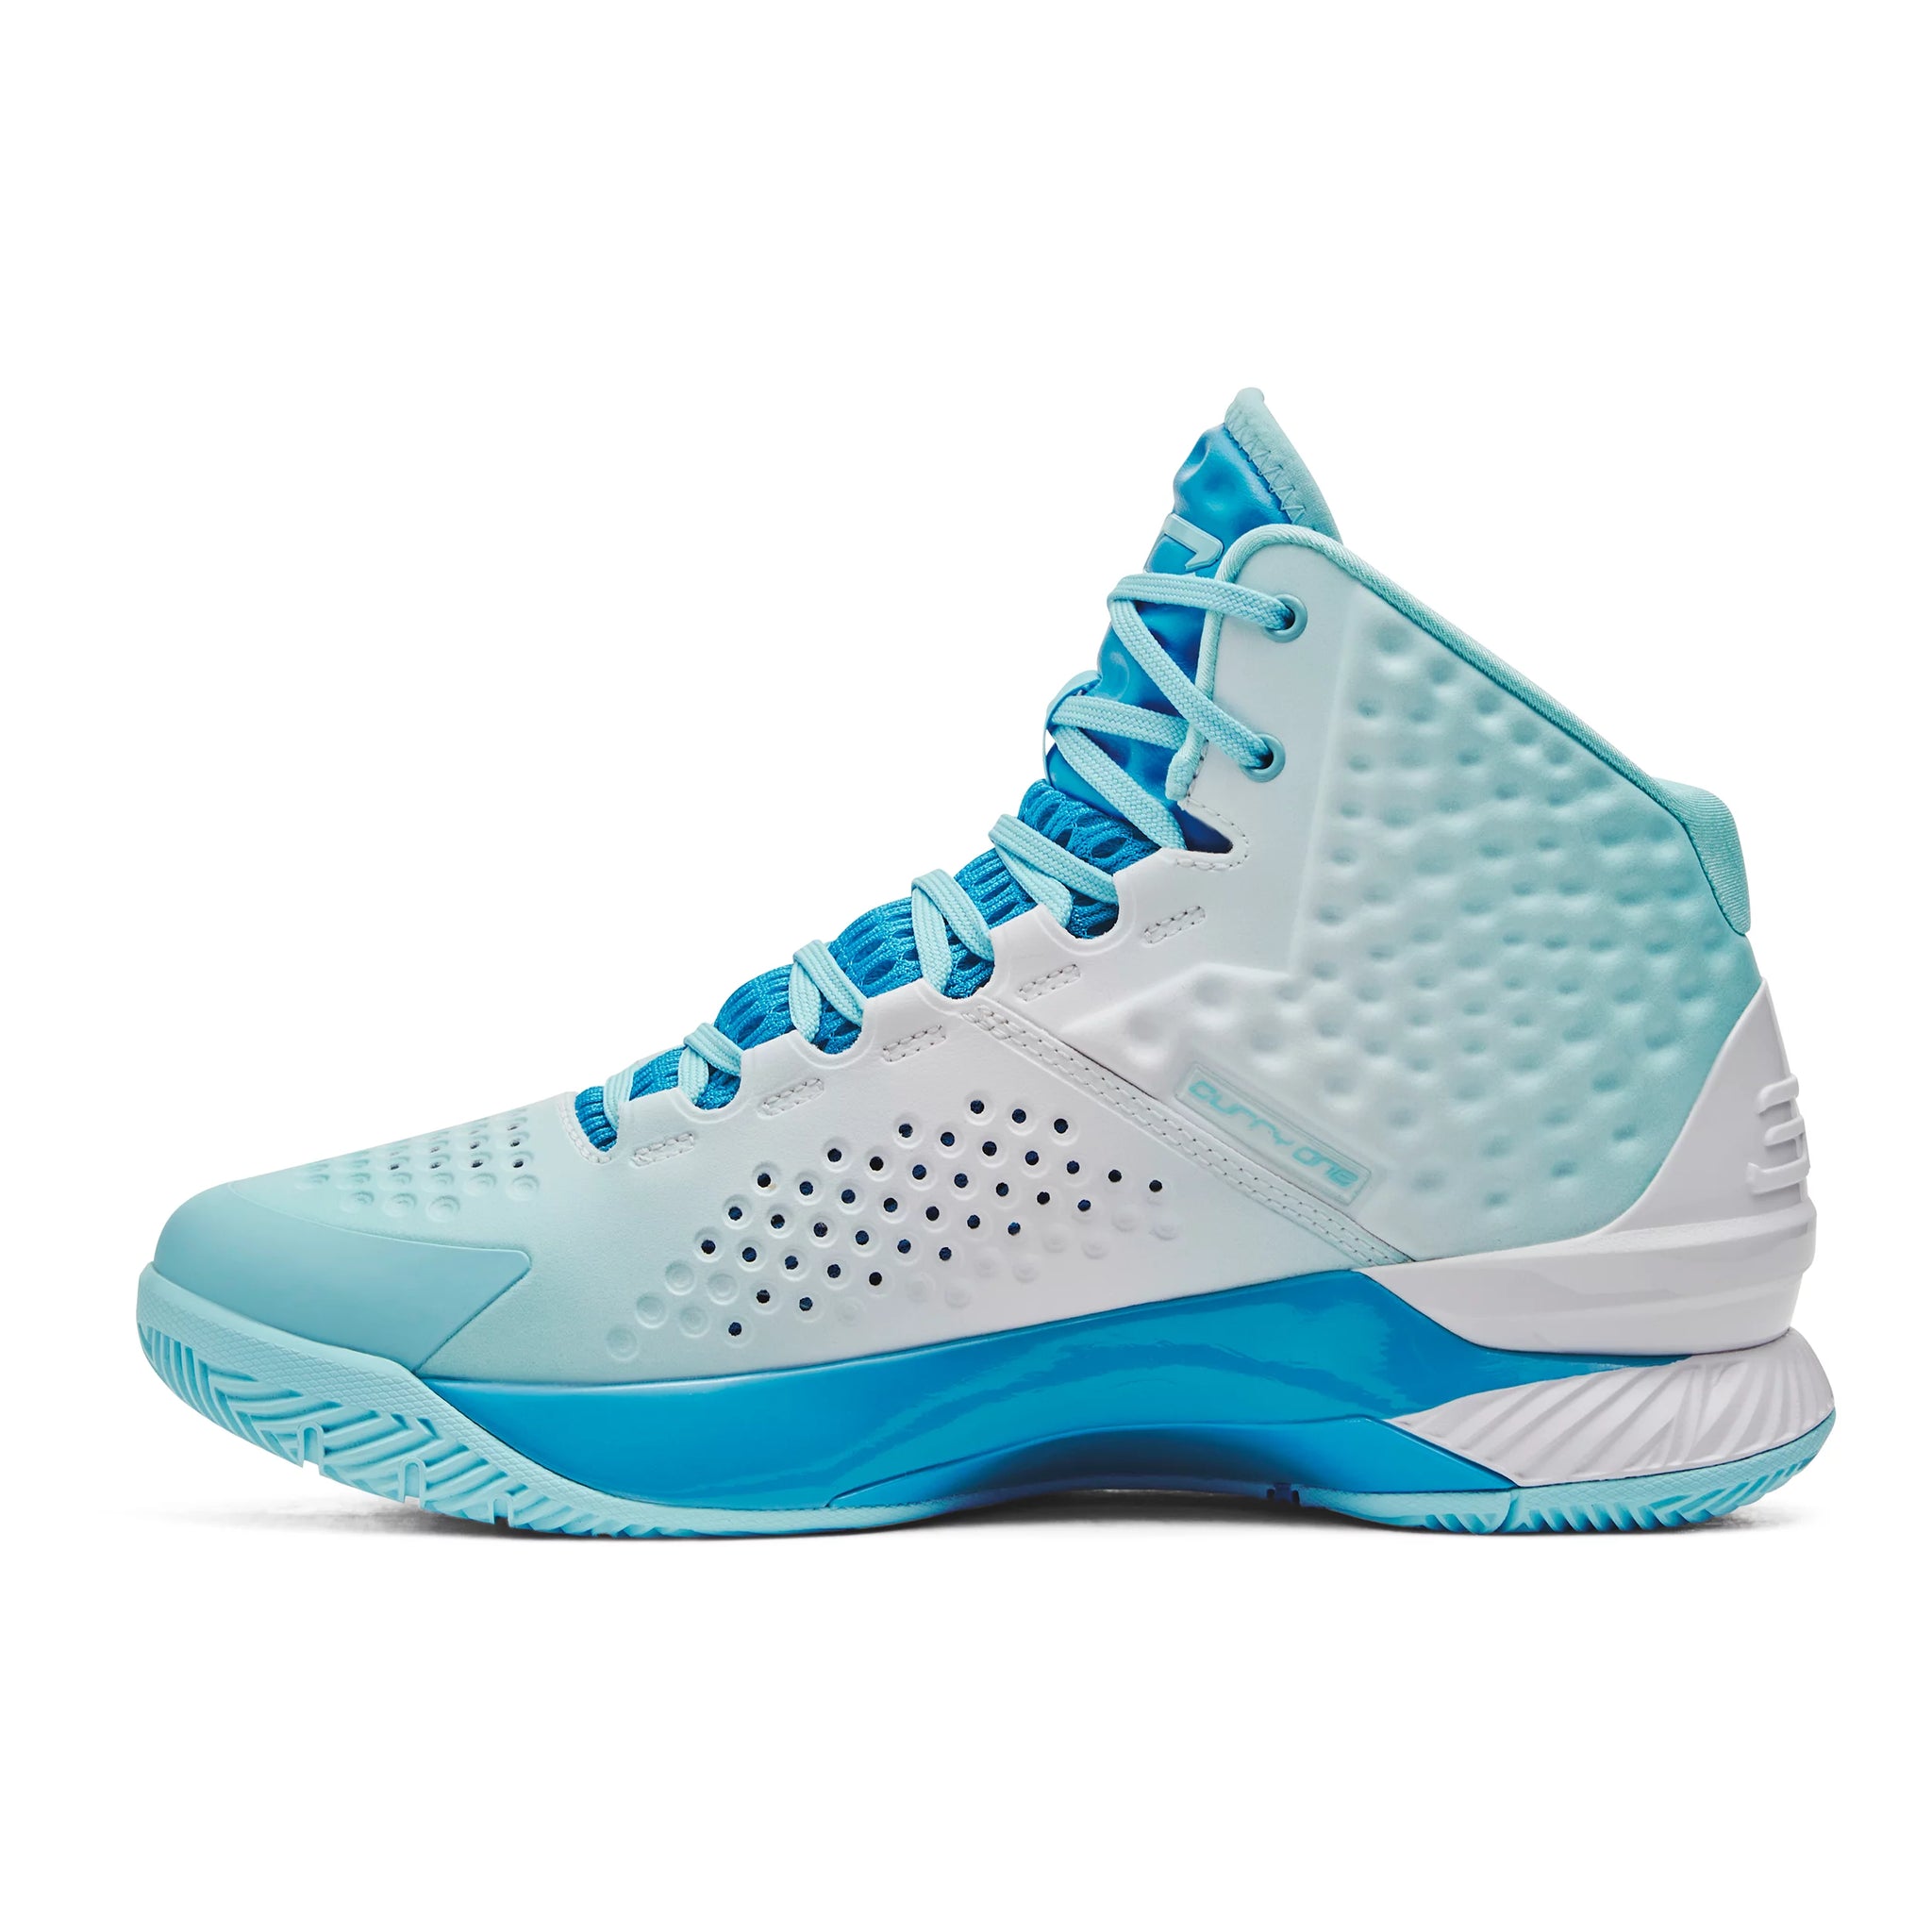 Under Armour Curry 1 Retro 'Mouthguard' | 3024397-400